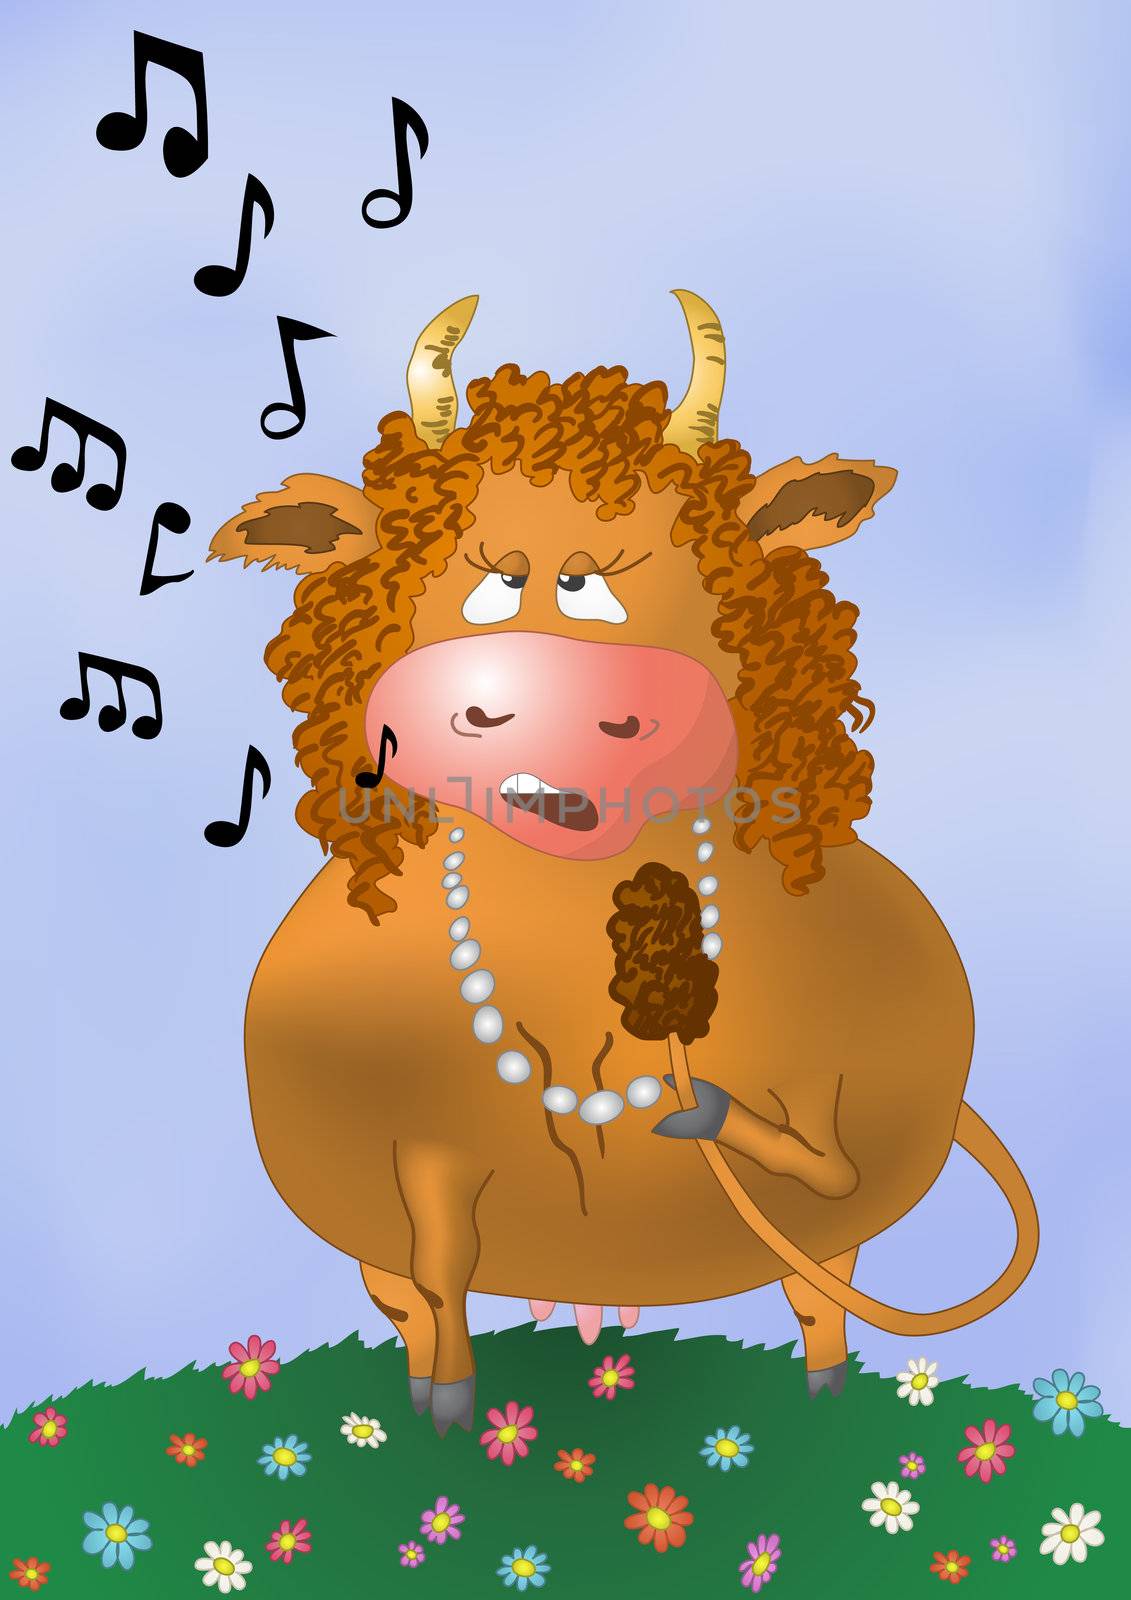 red cow on a green meadow sings a song